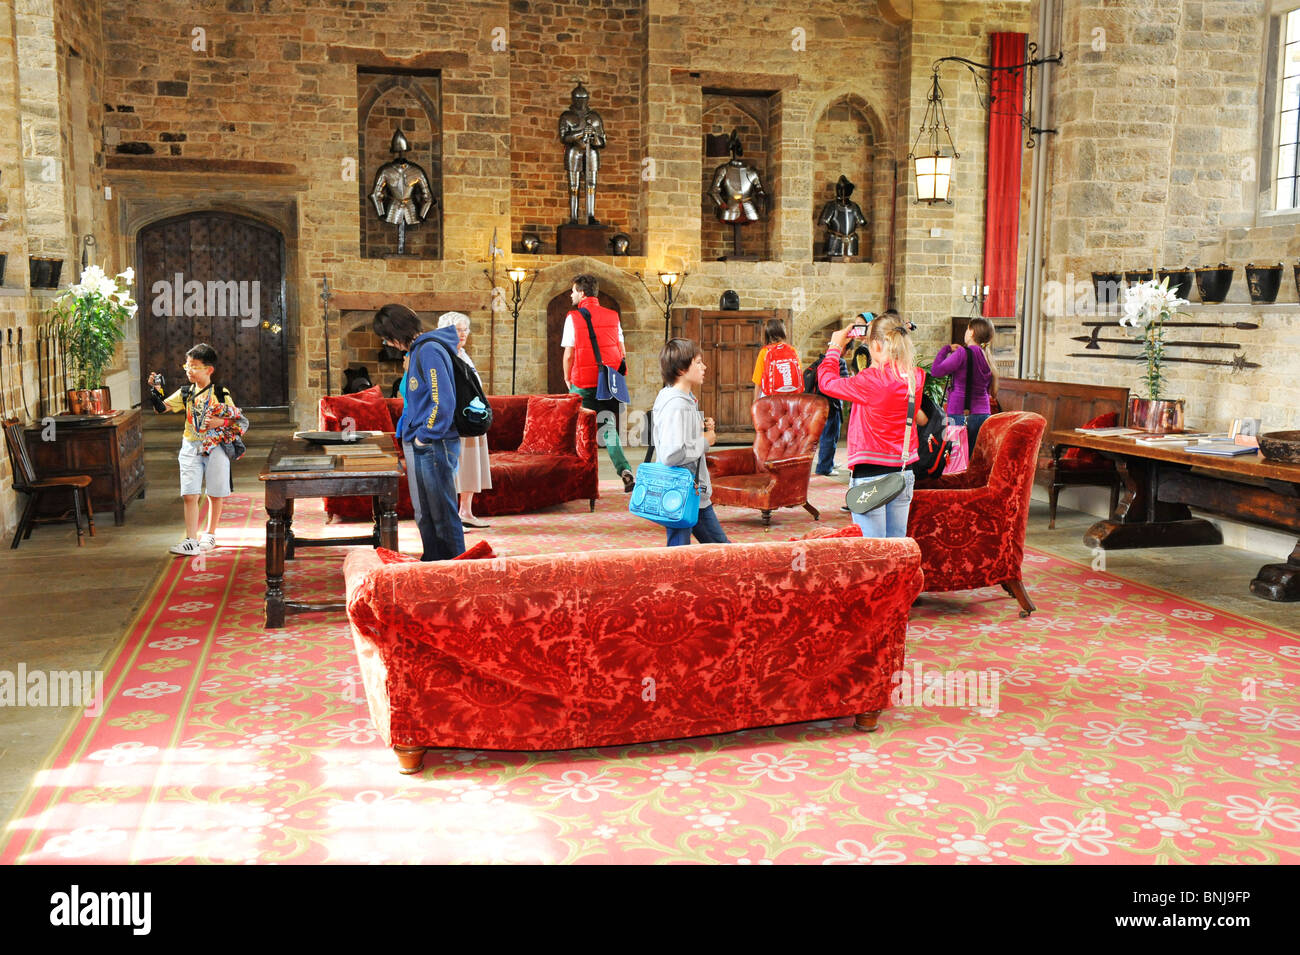 Visitors explore the halls and historic civil war displays at Broughton Castle near Banbury in Oxfordshire UK Stock Photo